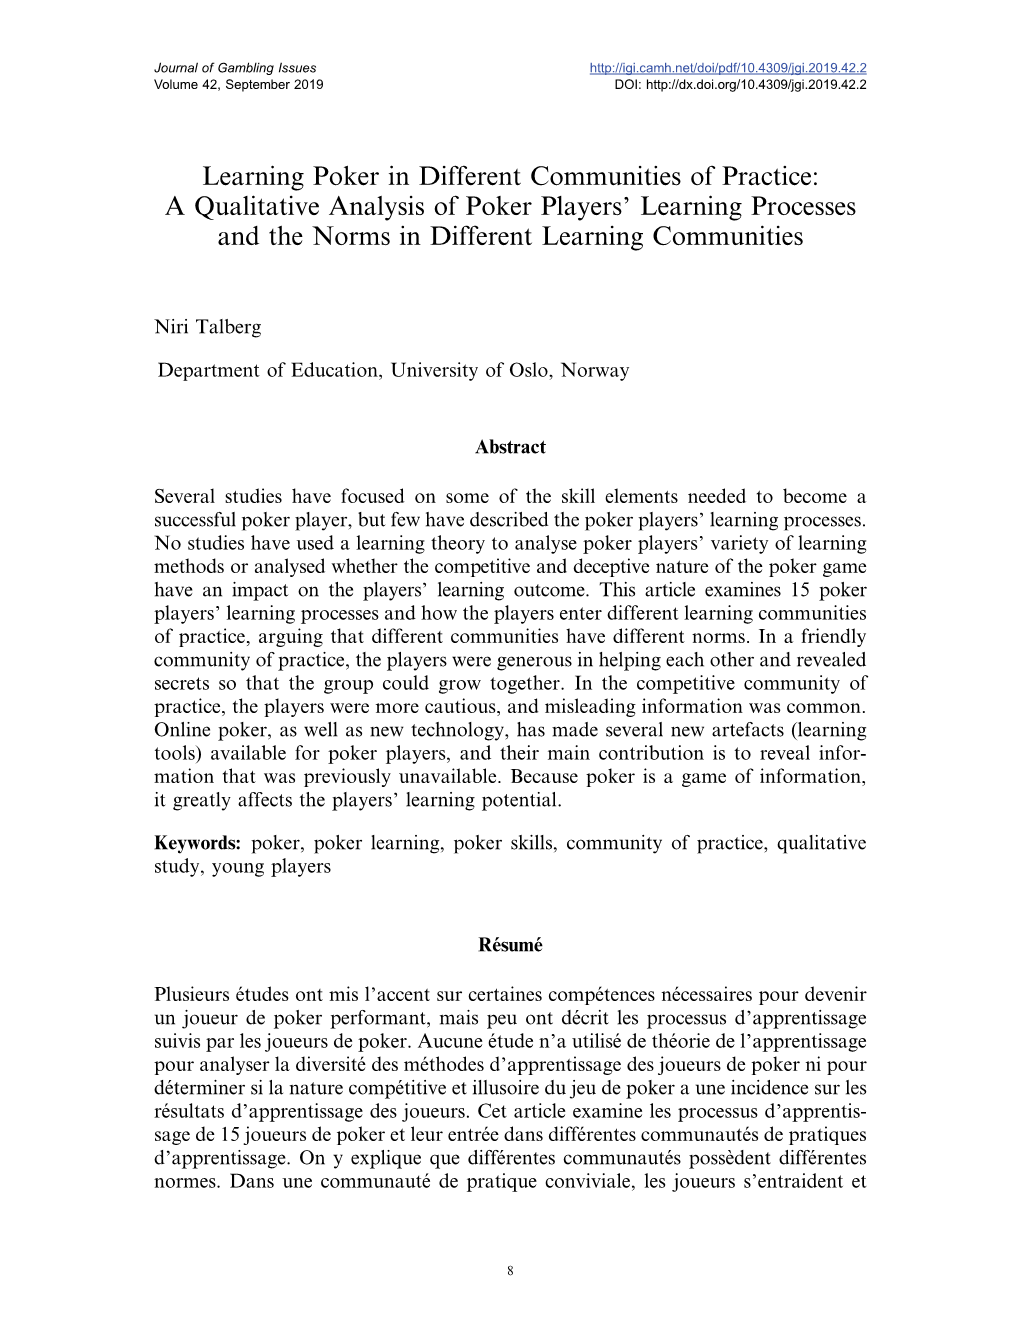 A Qualitative Analysis of Poker Players' Learning Processes